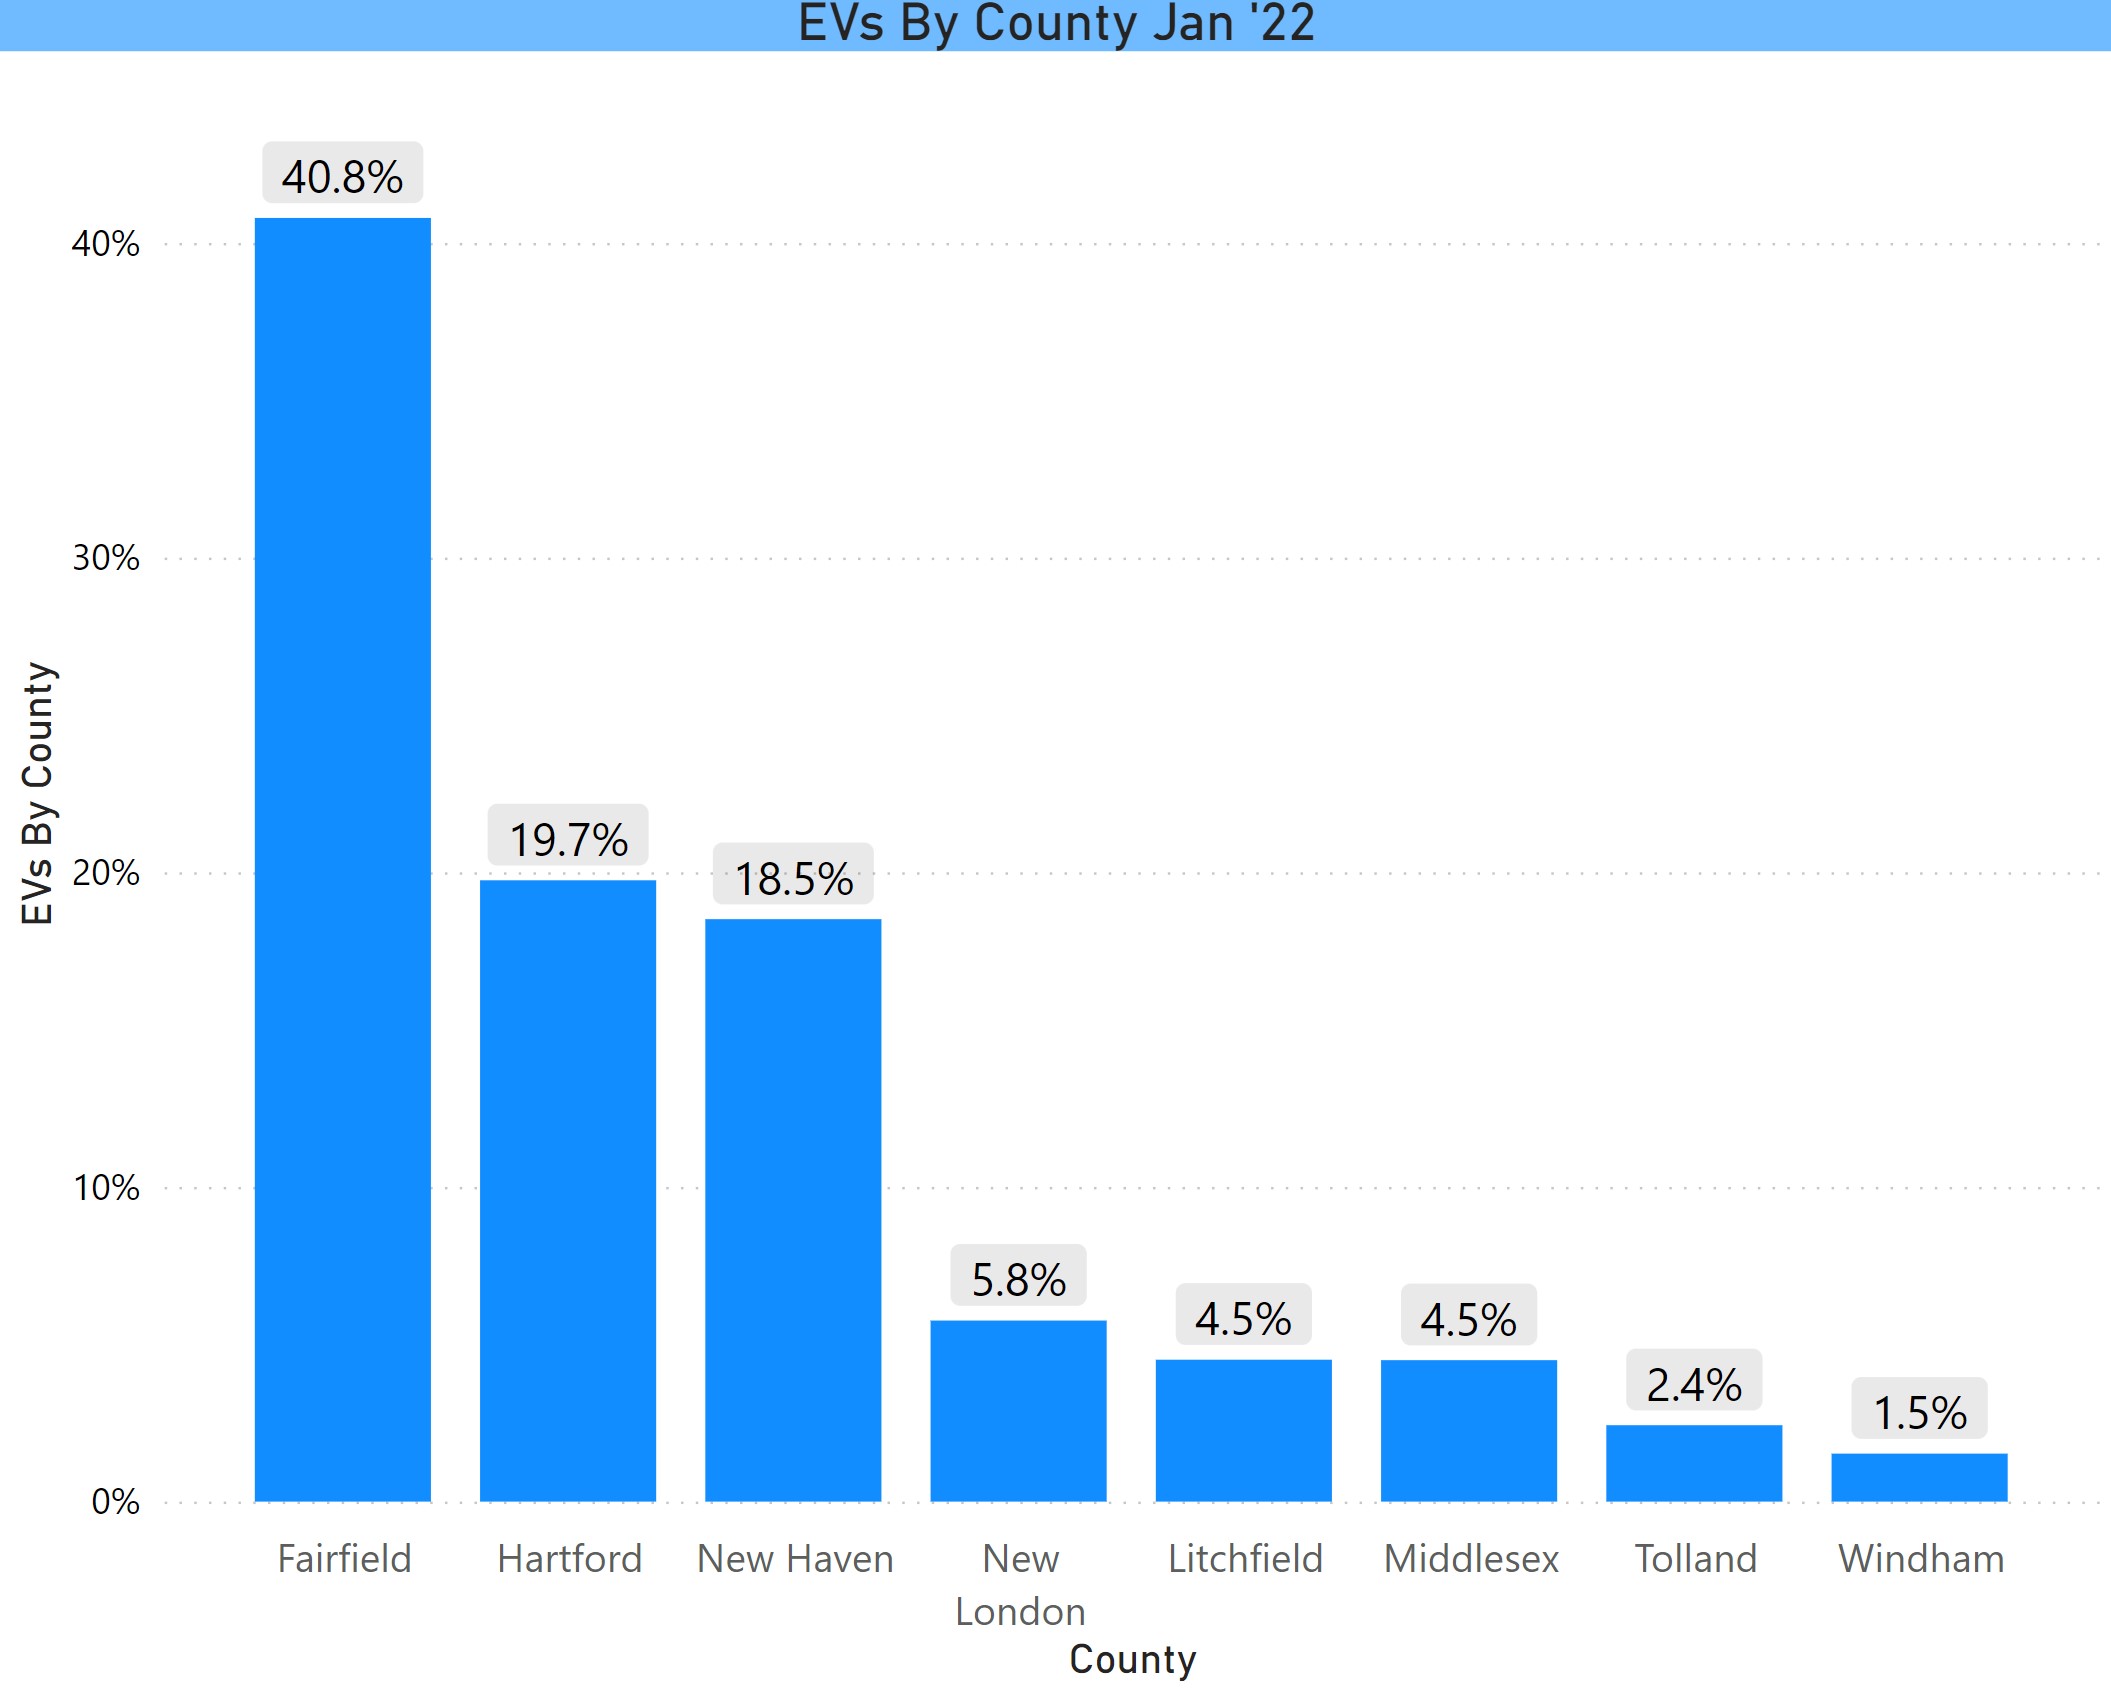 % EVs by County in CT 1-22